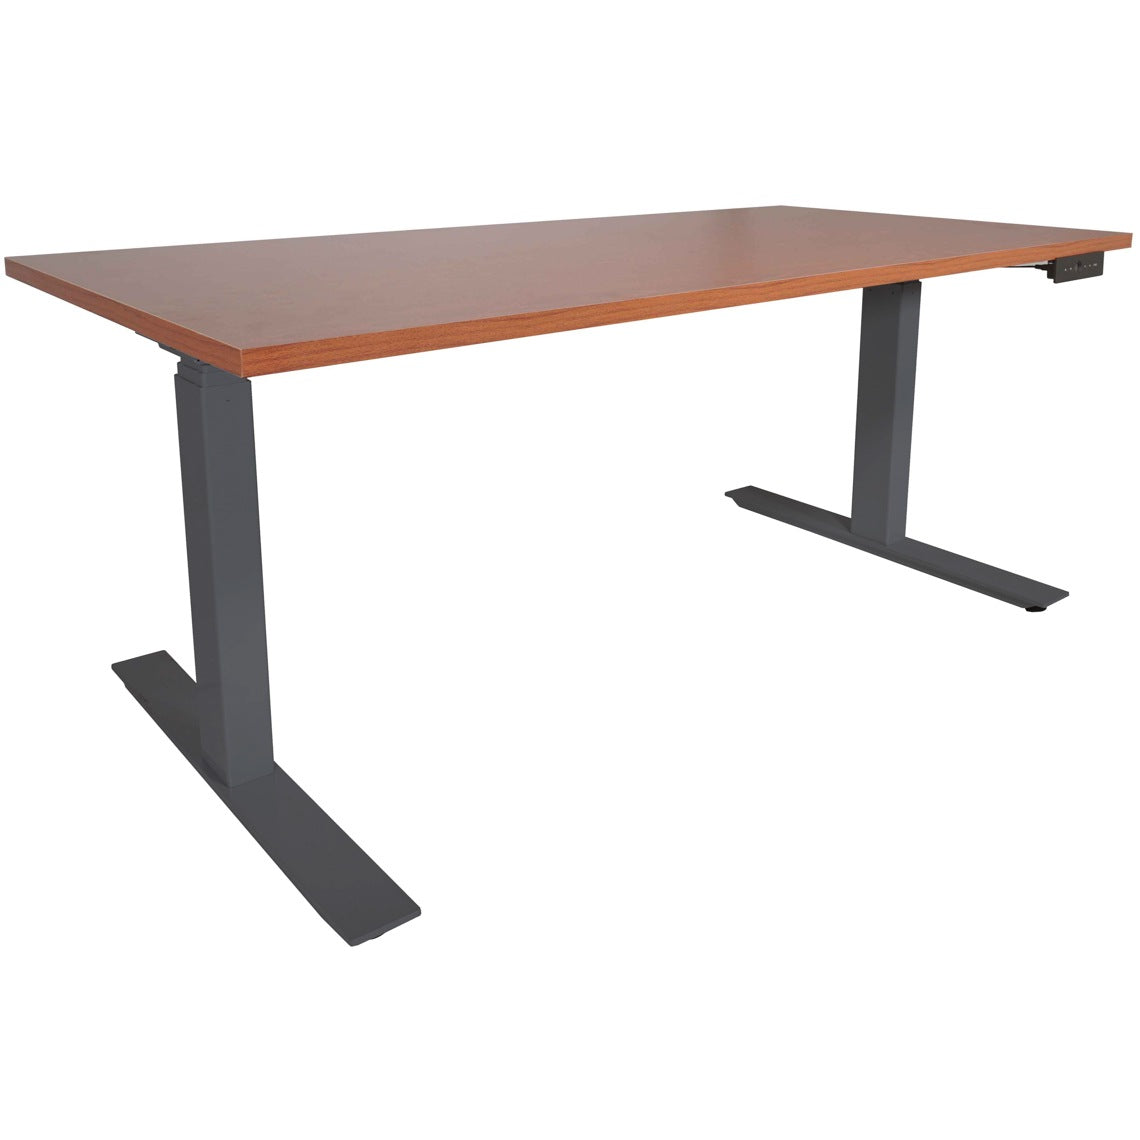 A6 Adjustable Sit To Stand Desk 24"- 50" W/ Wood 60" X 30" Top - view 2